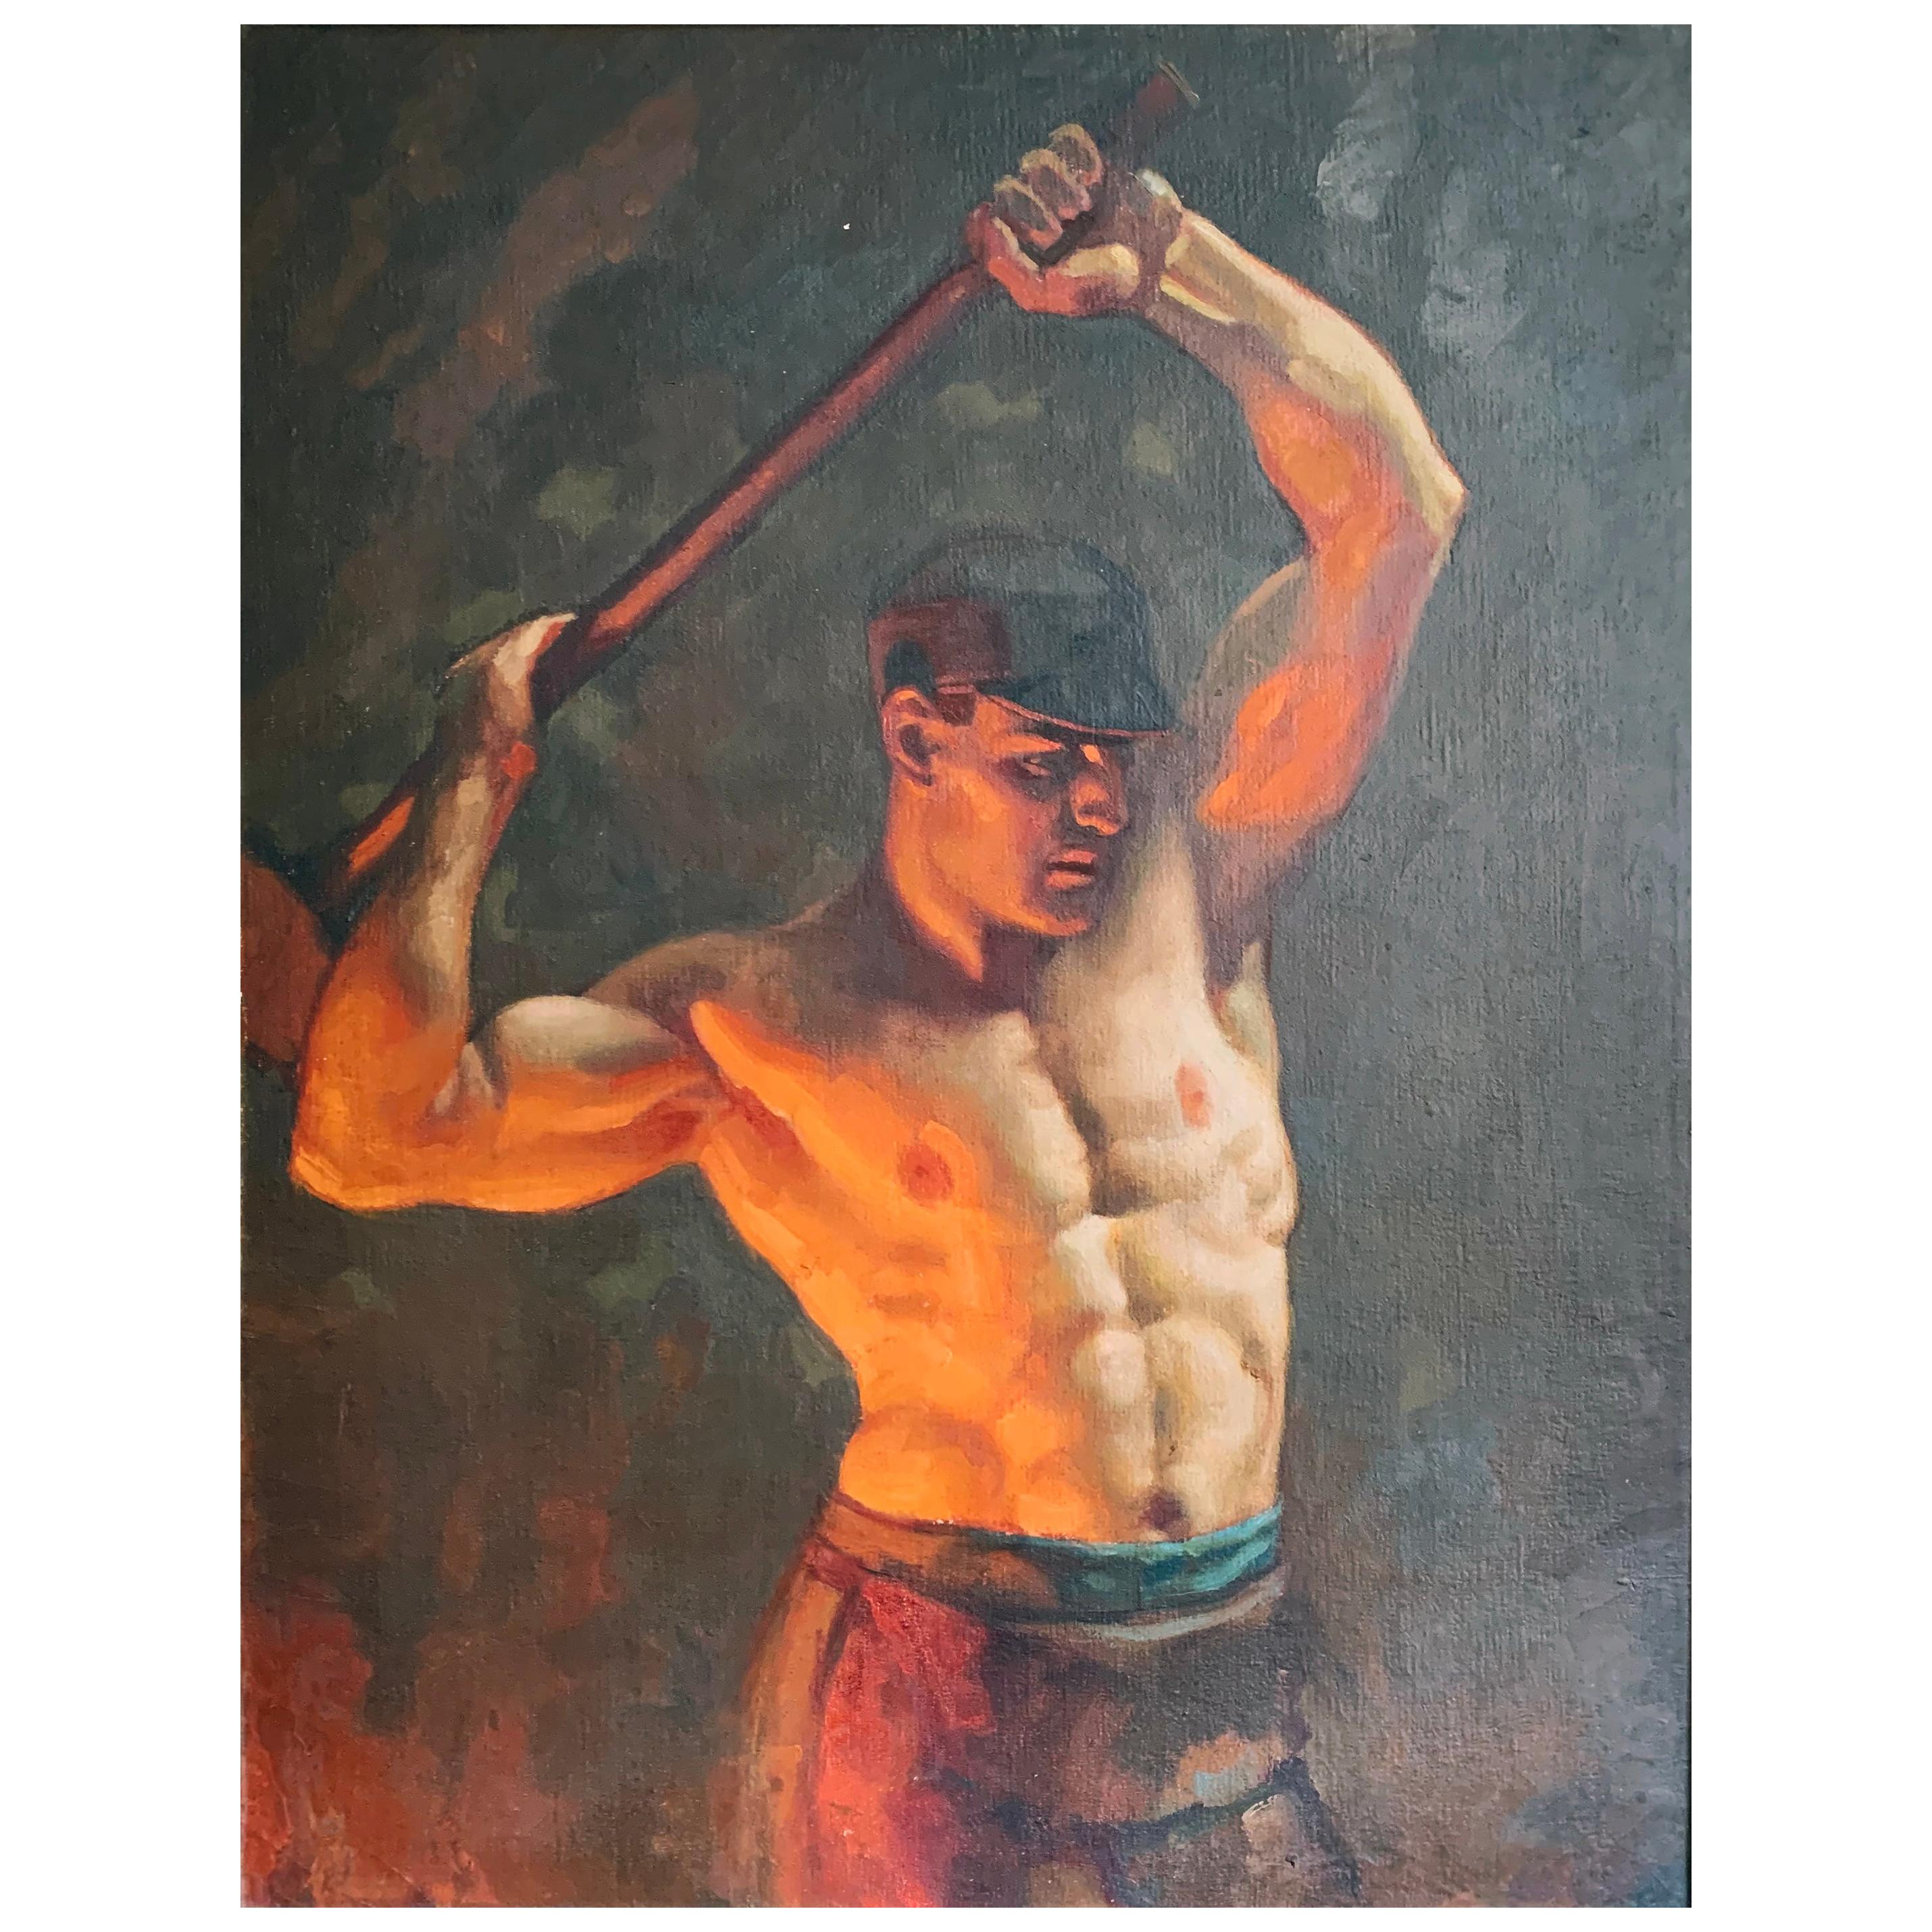 "The Ironworker, " Important Depiction of American Industrial Worker, John Garth